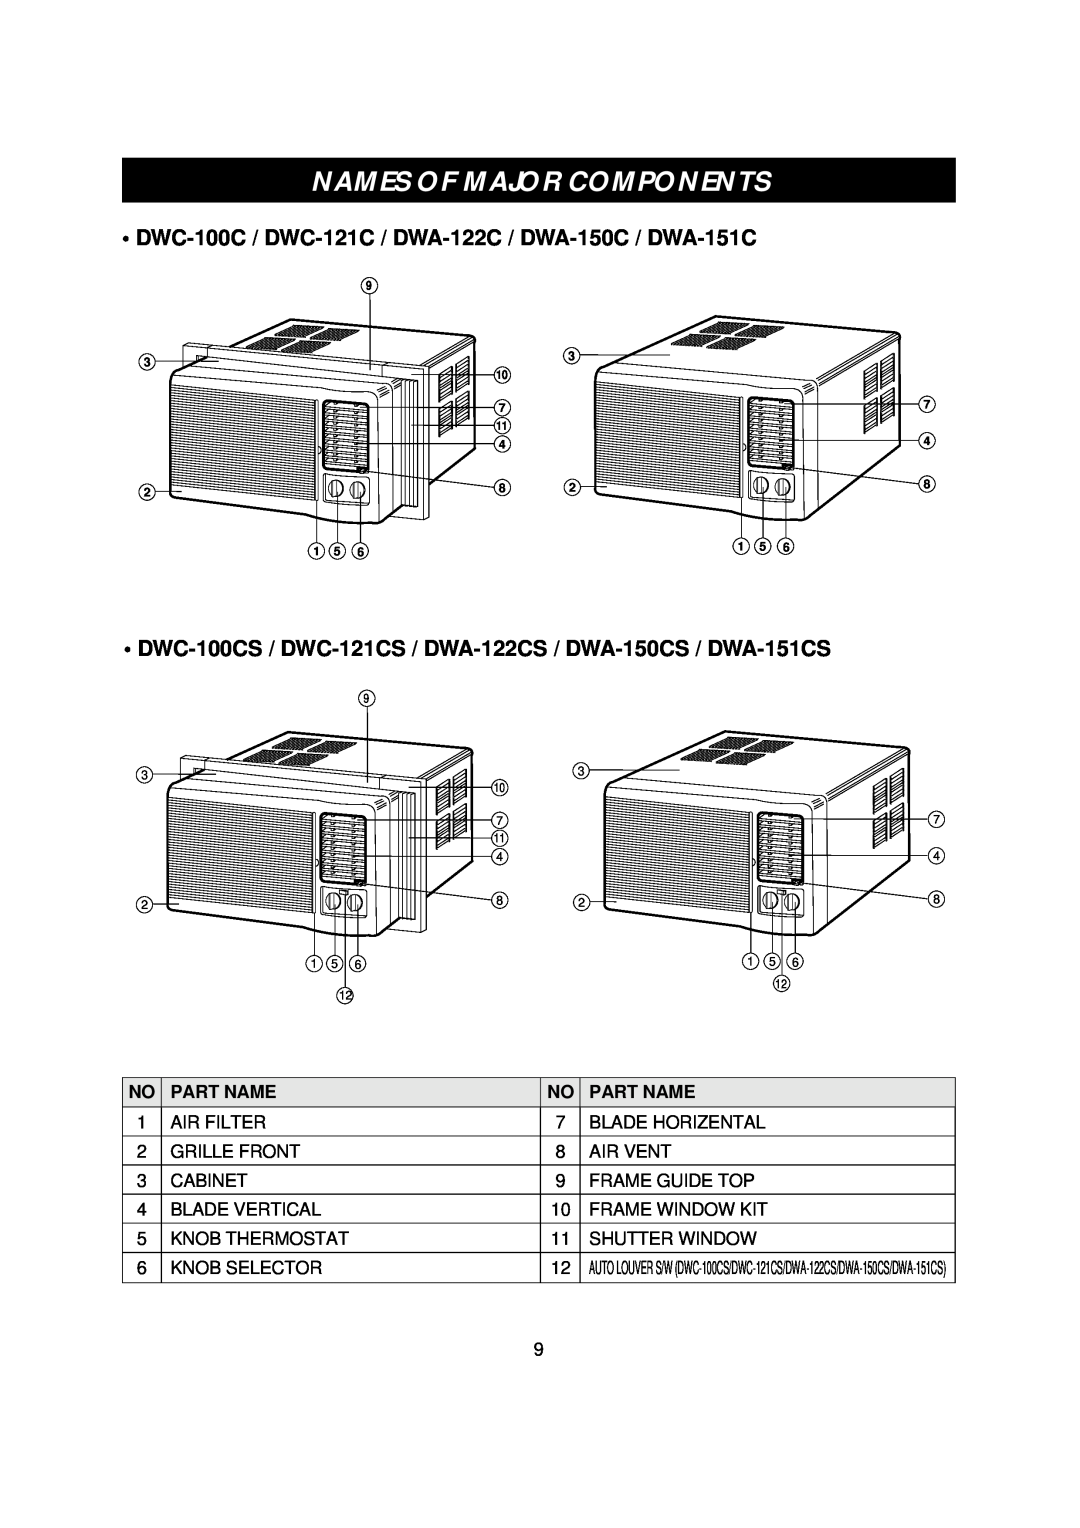 Daewoo DWC-100CS, DWC-121CS, DWA-150CS, DWA-122CS, DWA-151CS manual Names Of Major Components, Part Name 